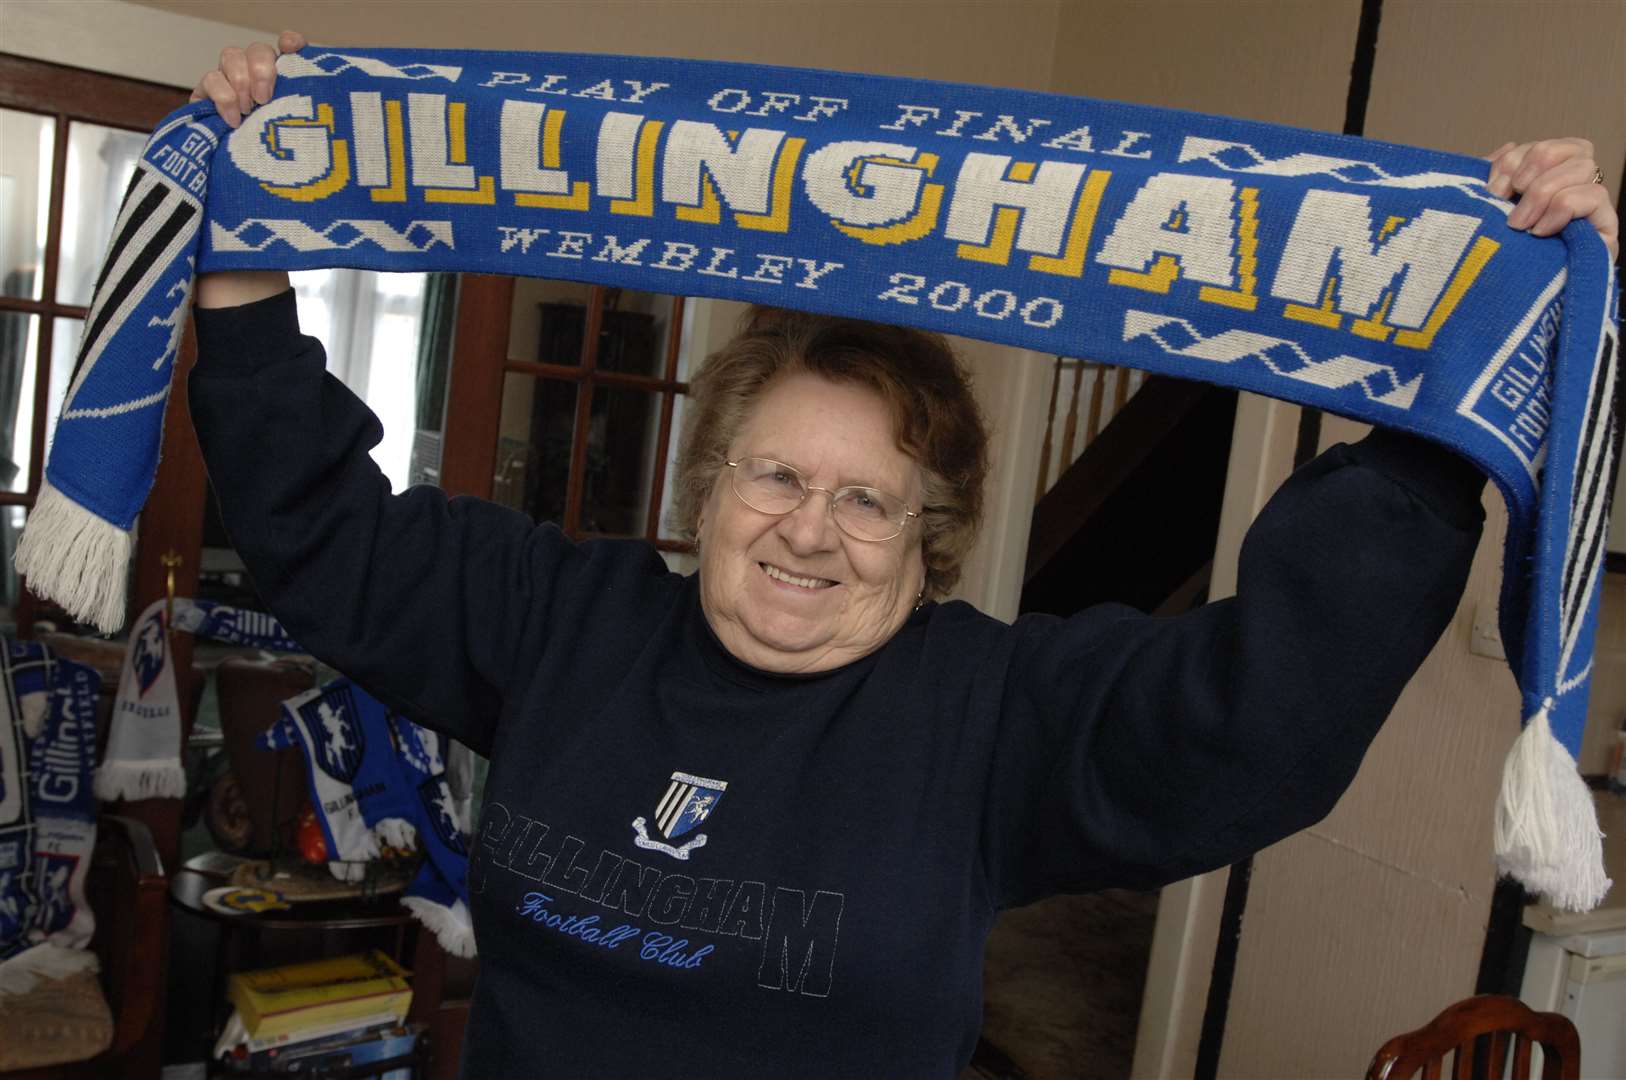 Gillingham fan Pam Tyler pictured several years ago has died at the age of 86 Picture: Grant Falvey